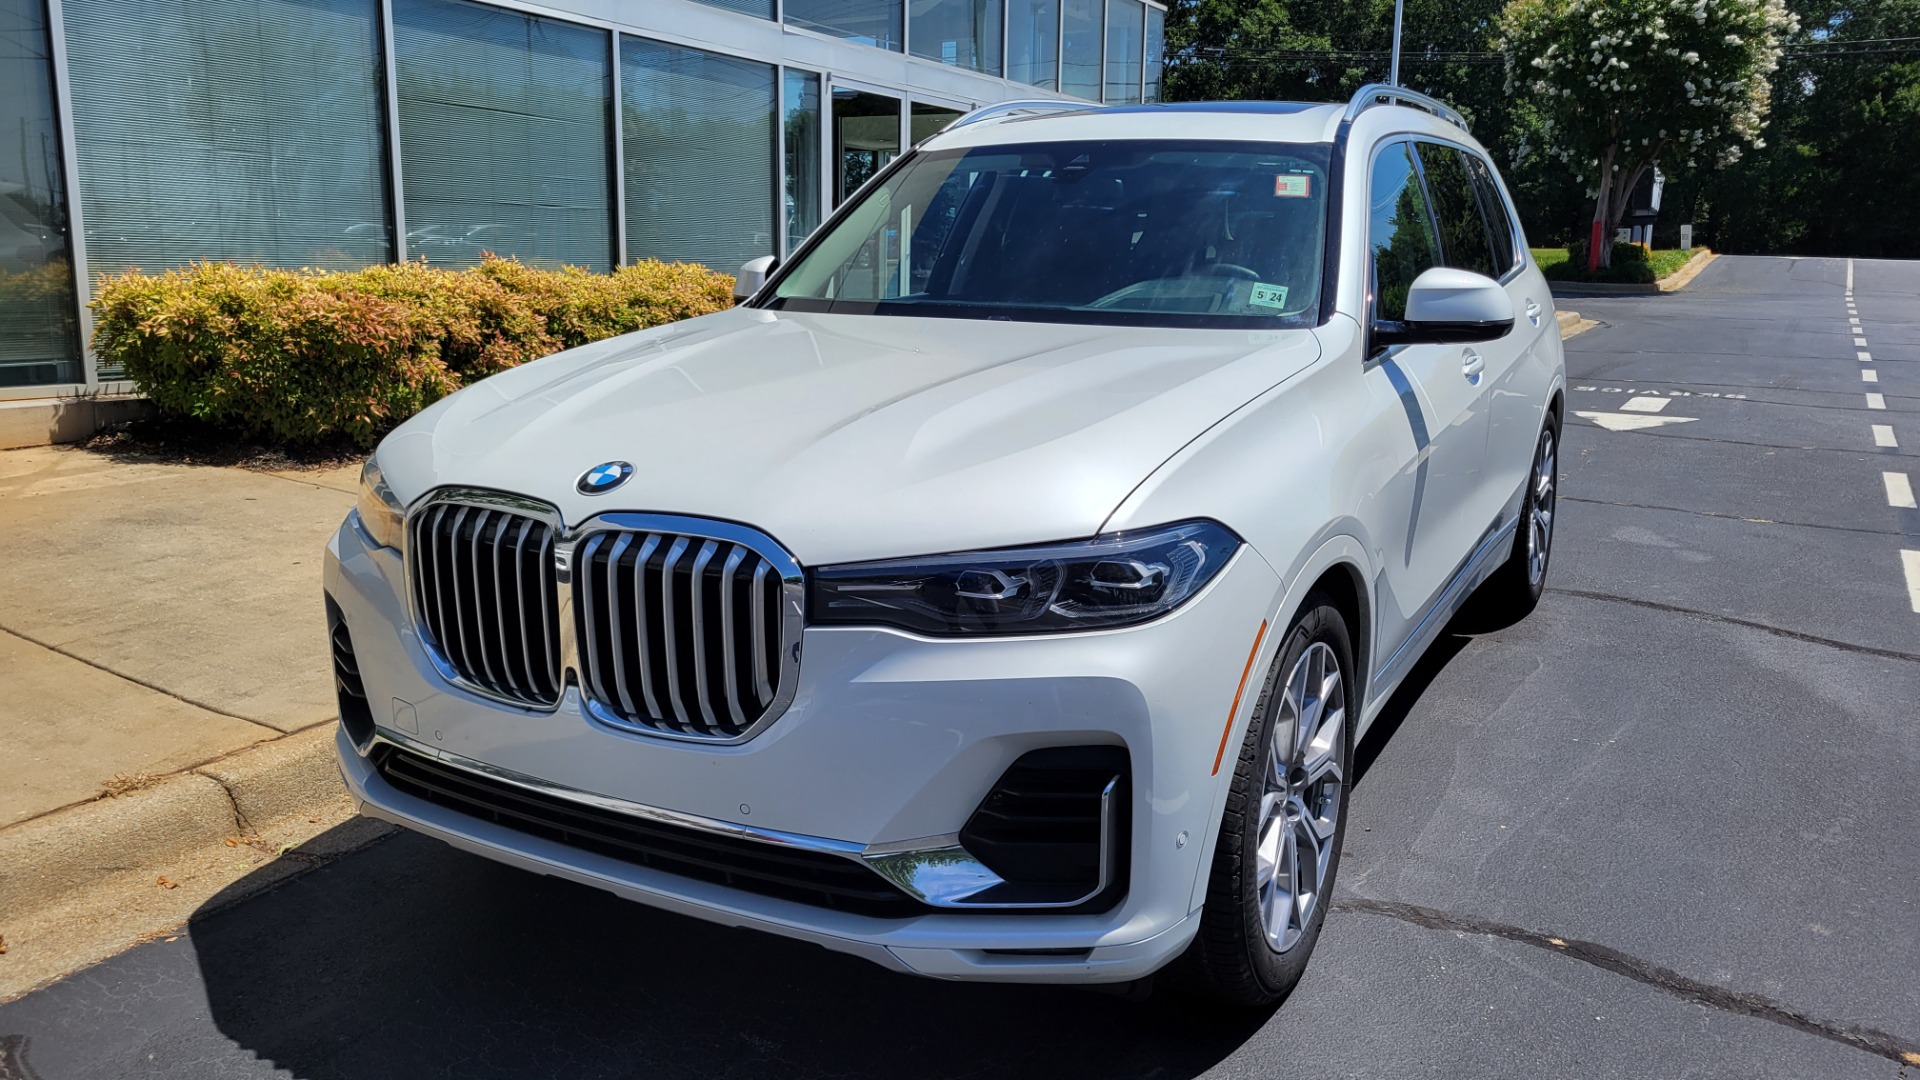 Used 2019 BMW X7 XDRIVE40I PREMIUM / NAV / HUD / PARK ASST PLUS / REMOTE START / 3D VIEW for sale $62,995 at Formula Imports in Charlotte NC 28227 2